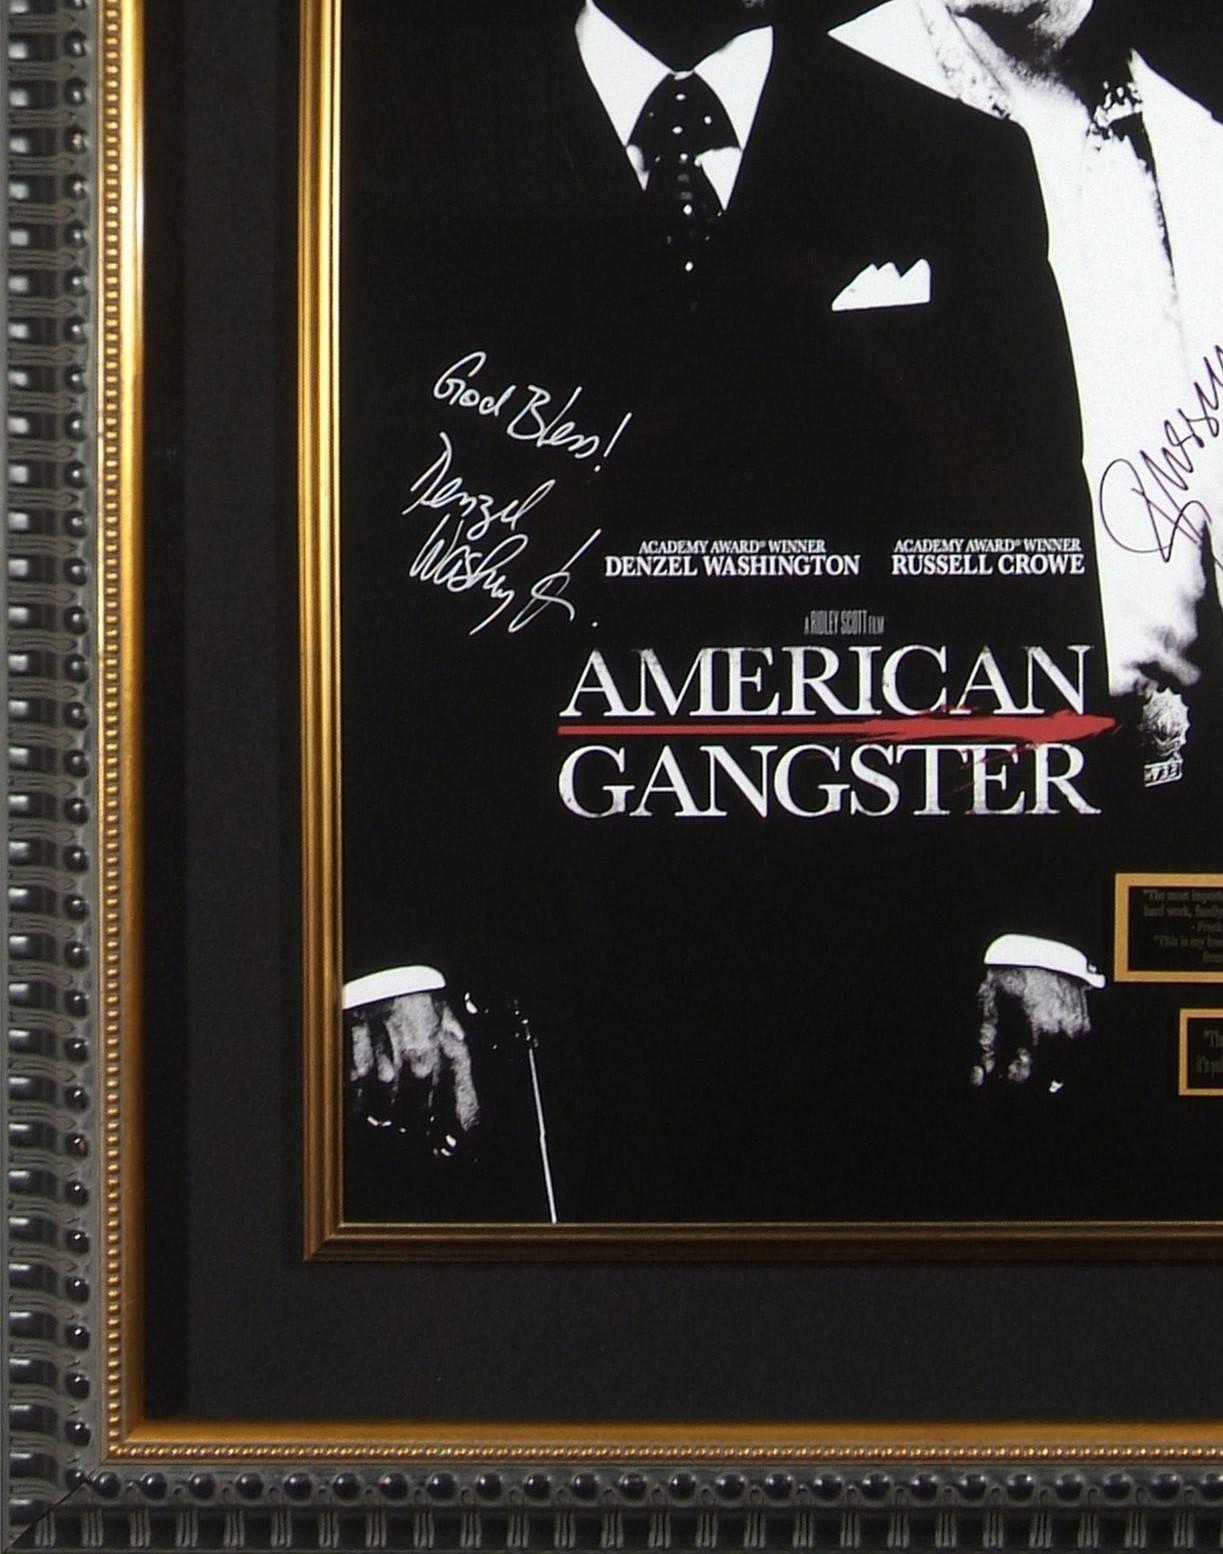 'American Gangster' autographed movie poster framed memorabilia display

• Featuring a 17.5 x 24” official 'American Gangster' movie poster
• Signed by Denzel Washington and Russell Crowe
• Product weight: 12kg
• Frame dimensions: inches 91 cm